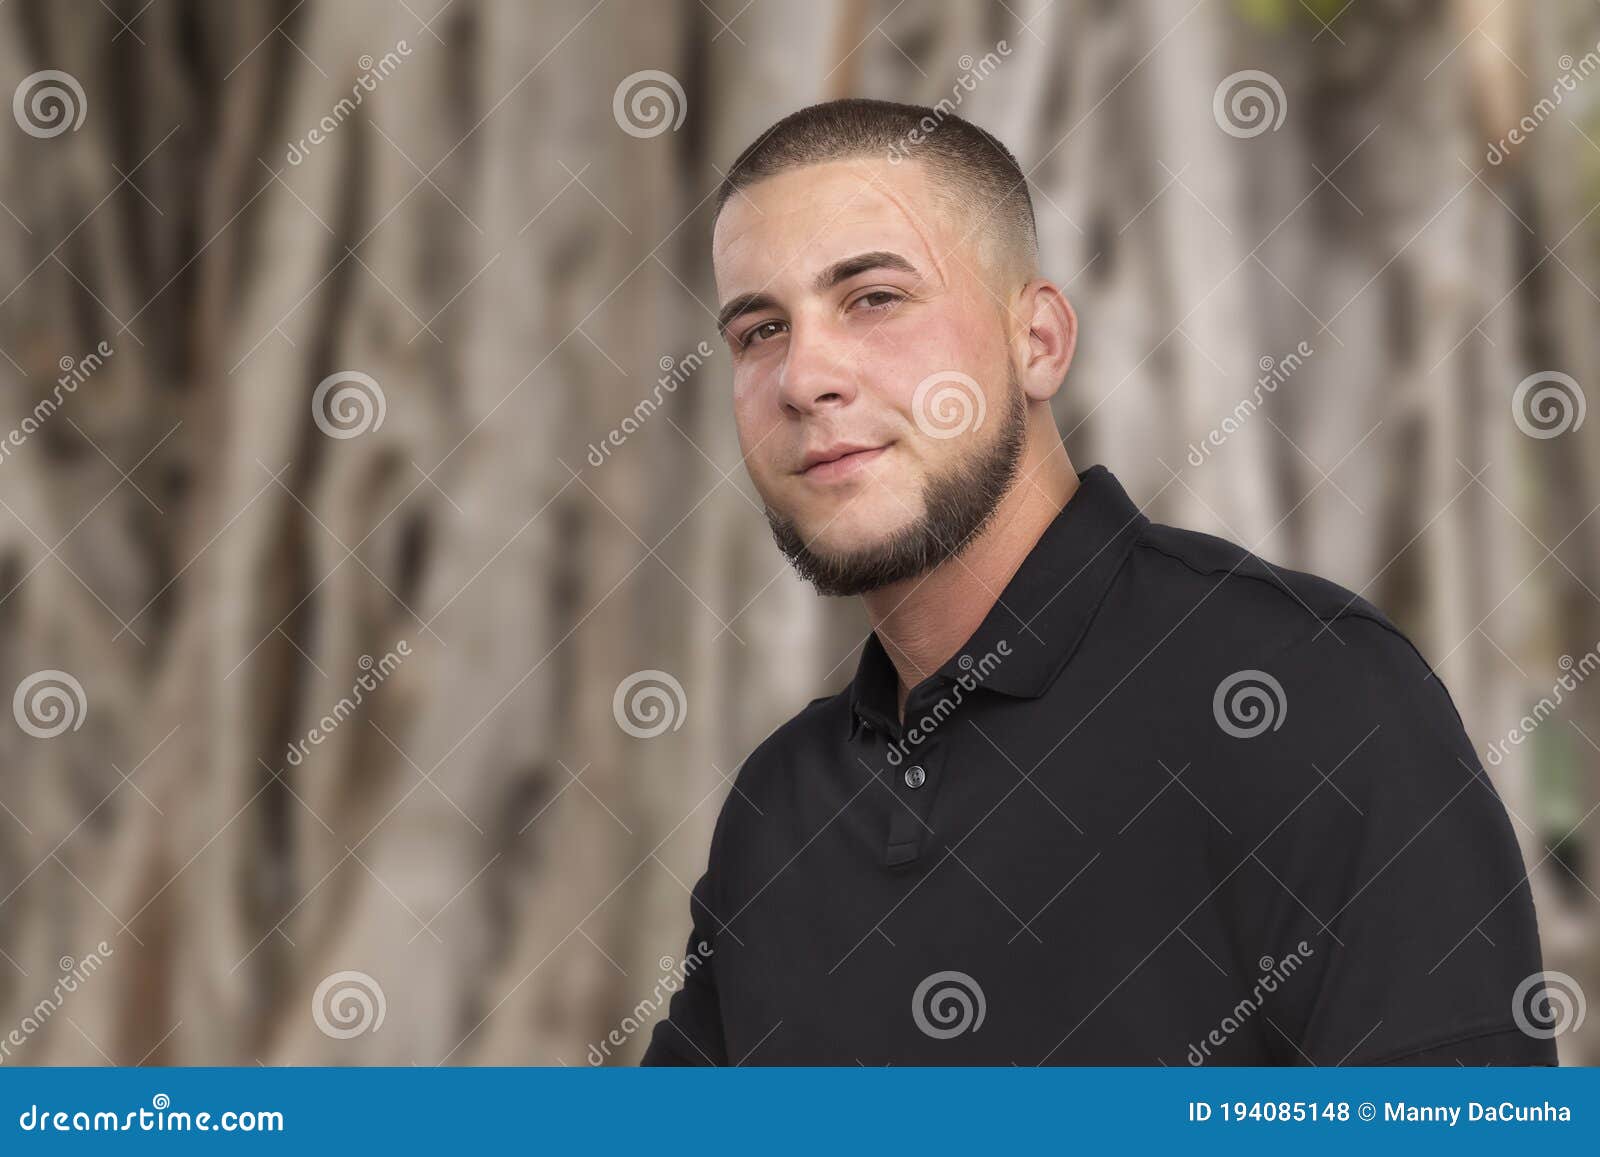 handsome young man deep scar above his eye looks camera neatly trimmed chin chair matched military style buzz cut 194085148